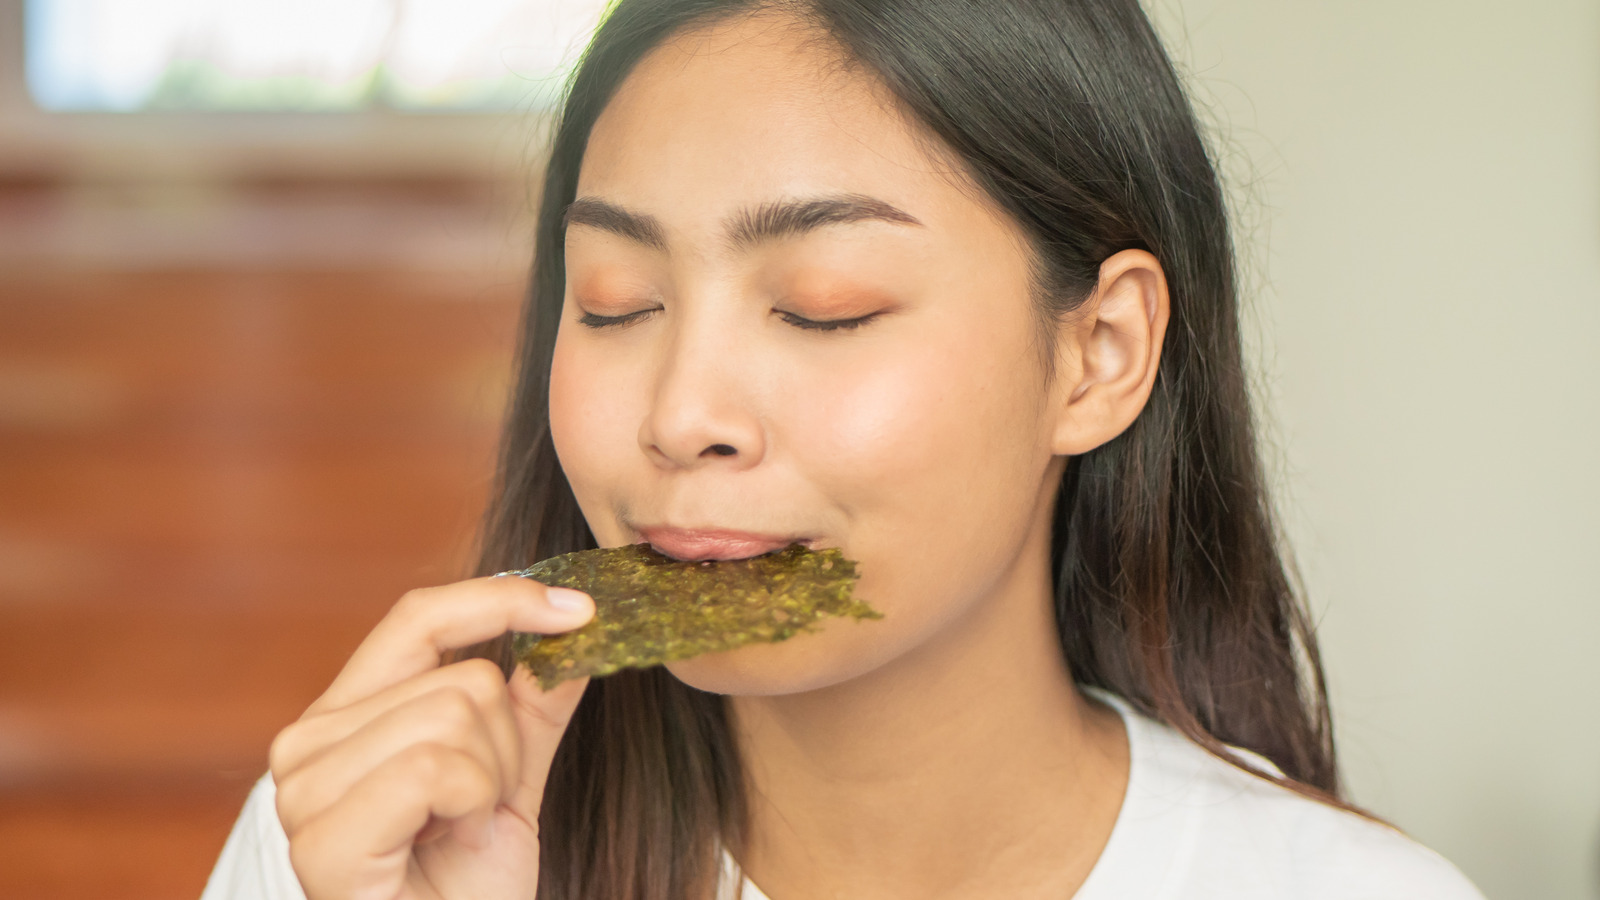 Why Do Some People Crave Seaweed When Pregnant